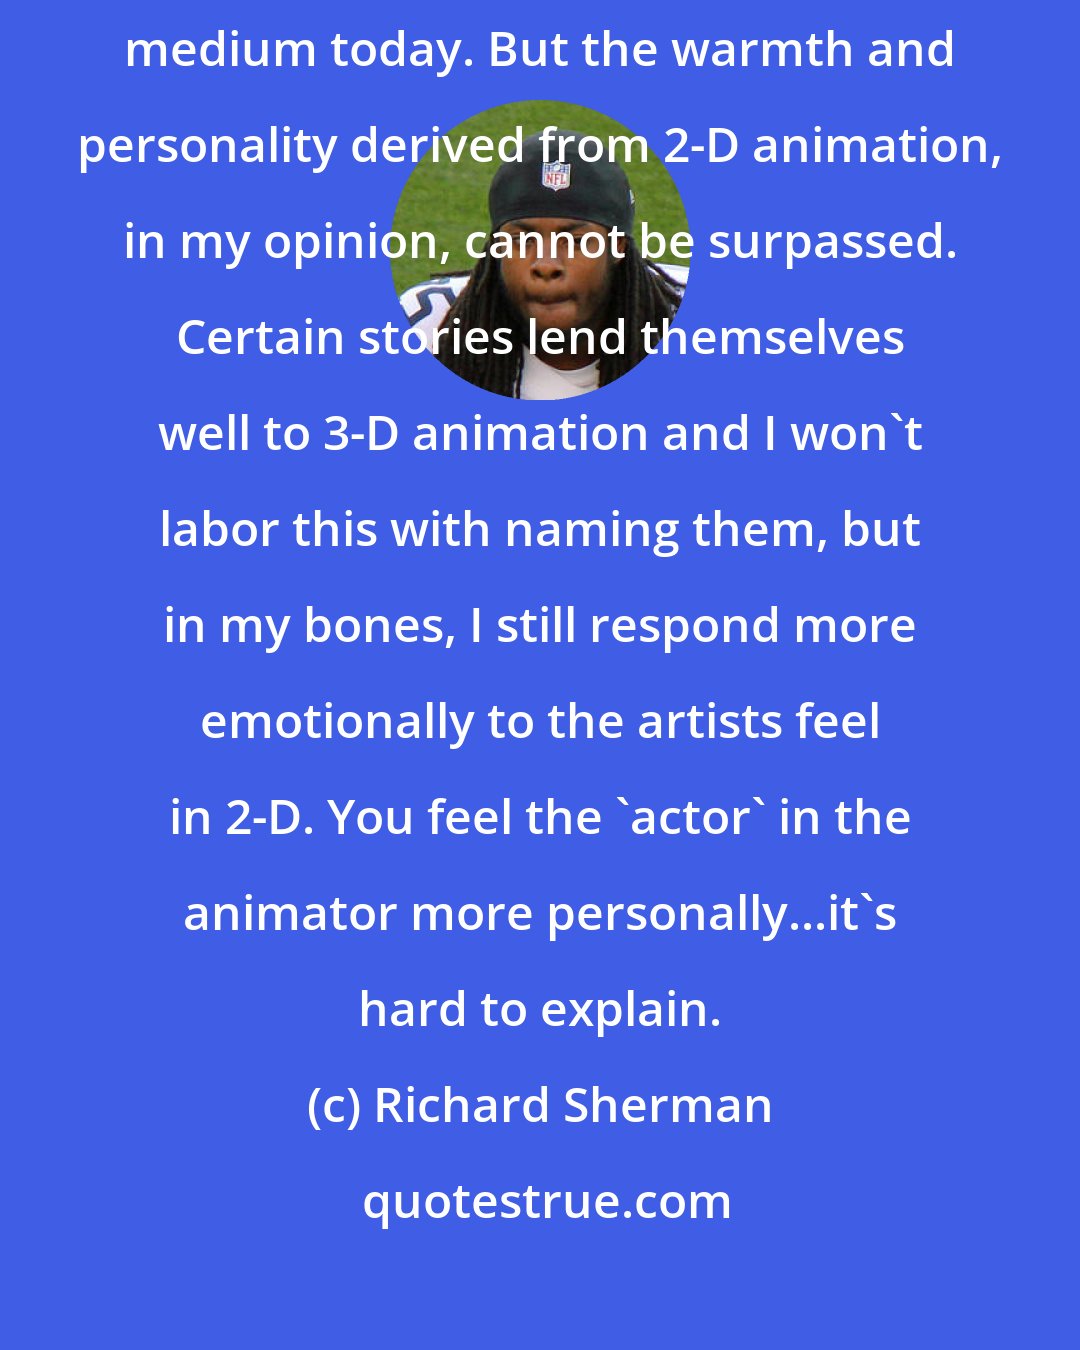 Richard Sherman: First of all, computer animation is certainly a tremendous and viable medium today. But the warmth and personality derived from 2-D animation, in my opinion, cannot be surpassed. Certain stories lend themselves well to 3-D animation and I won't labor this with naming them, but in my bones, I still respond more emotionally to the artists feel in 2-D. You feel the 'actor' in the animator more personally...it's hard to explain.